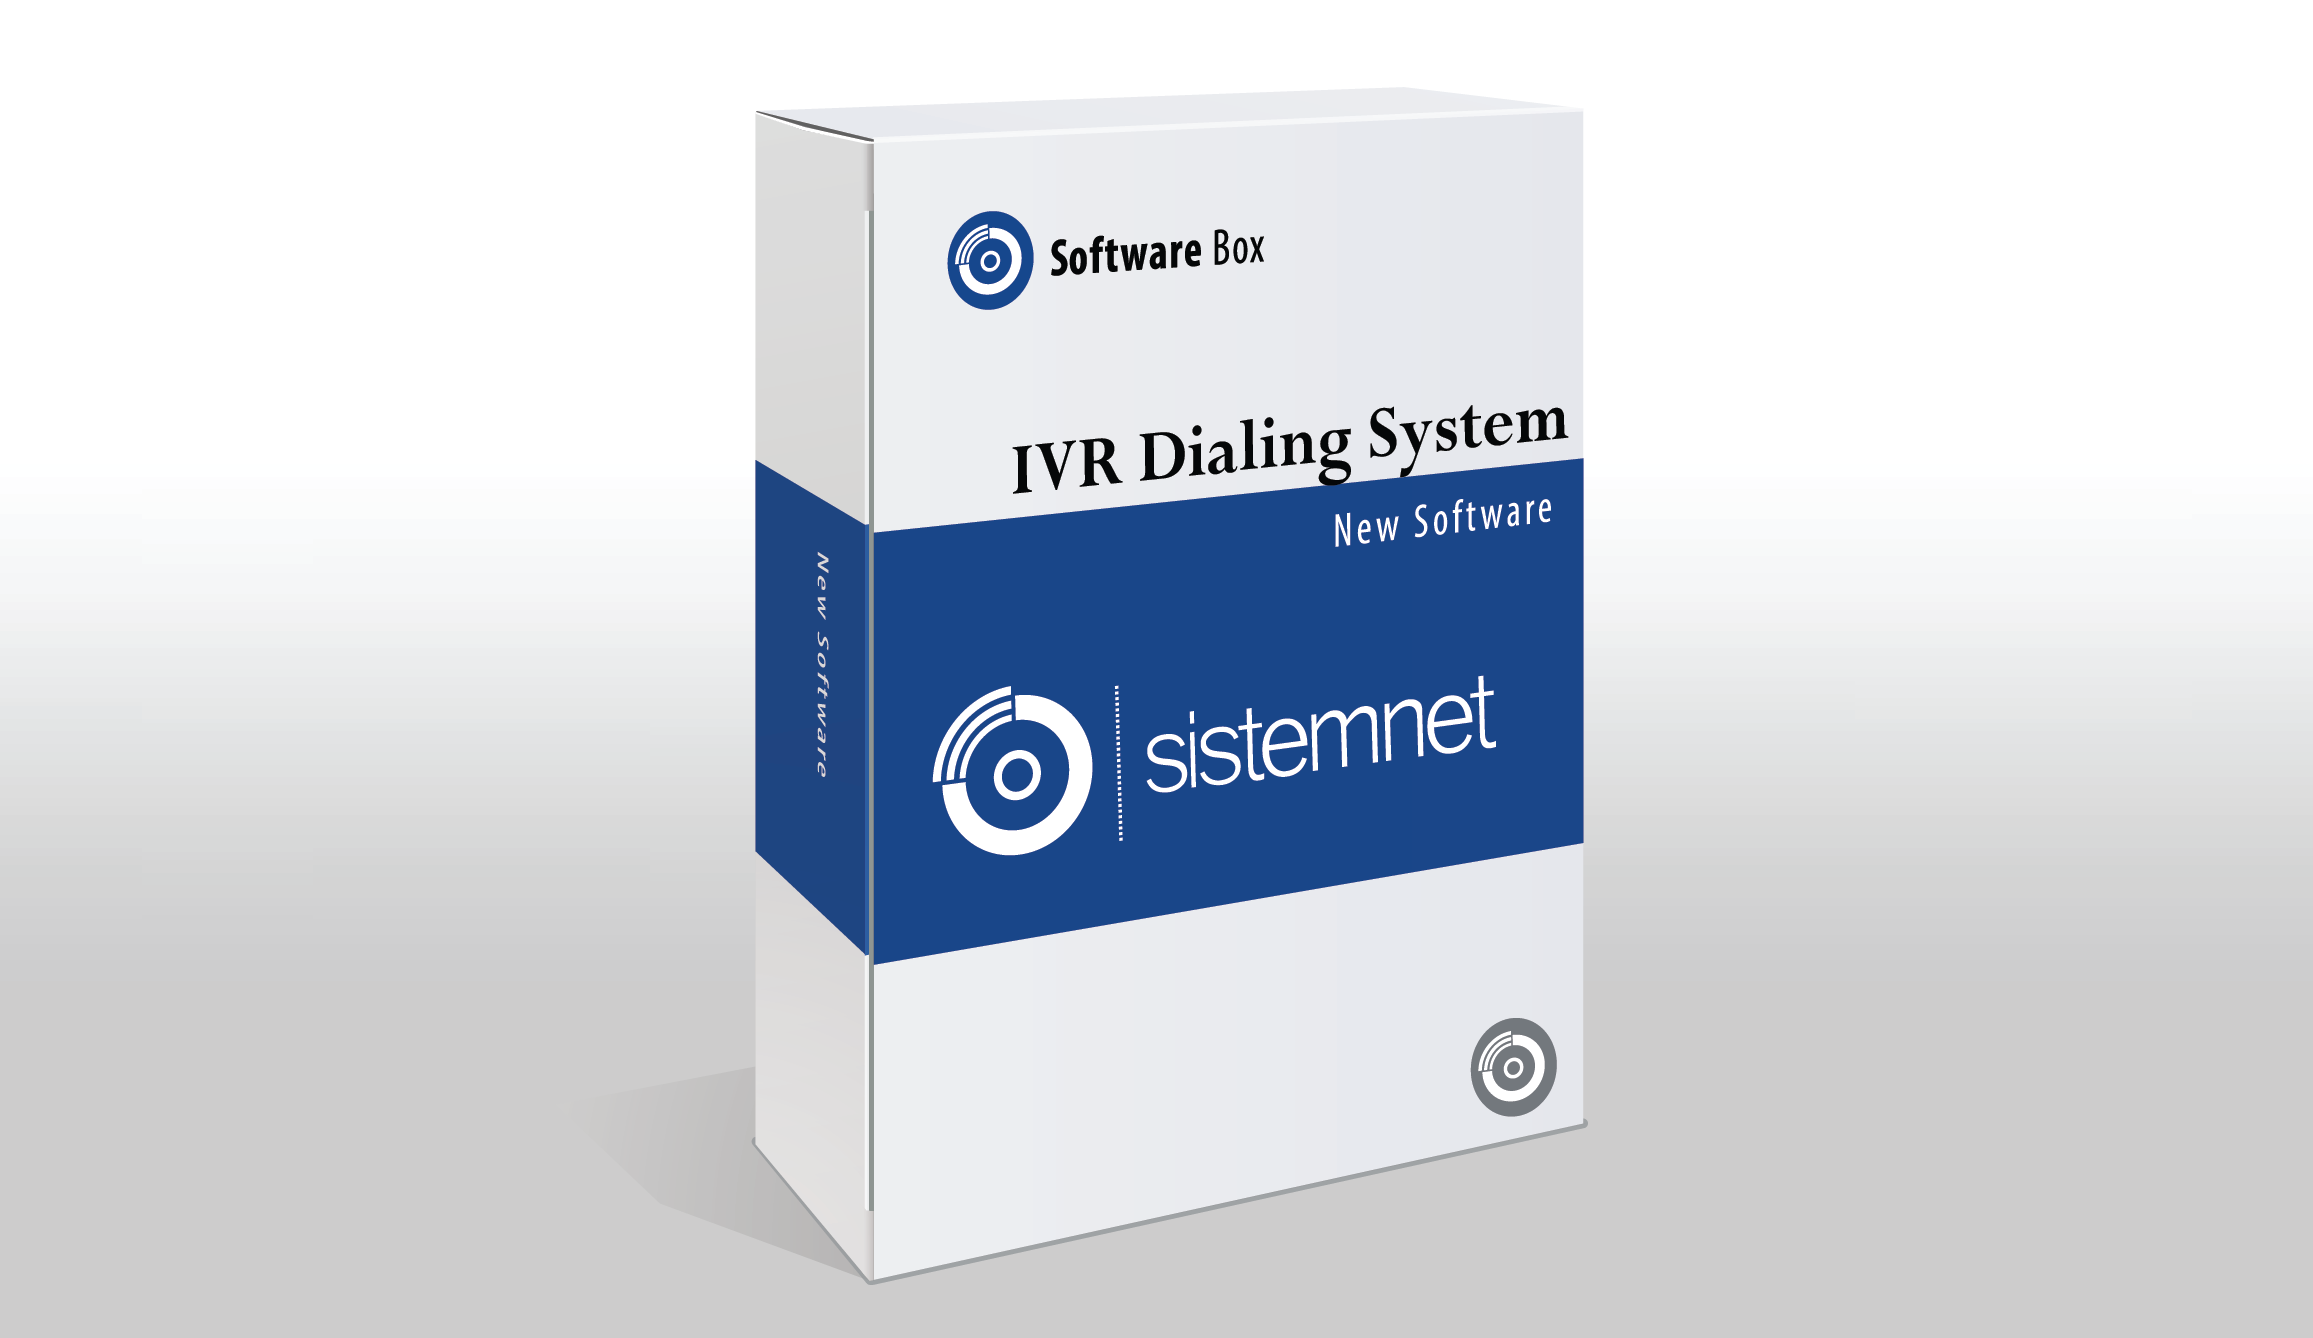 IVR DIALING SYSTEM